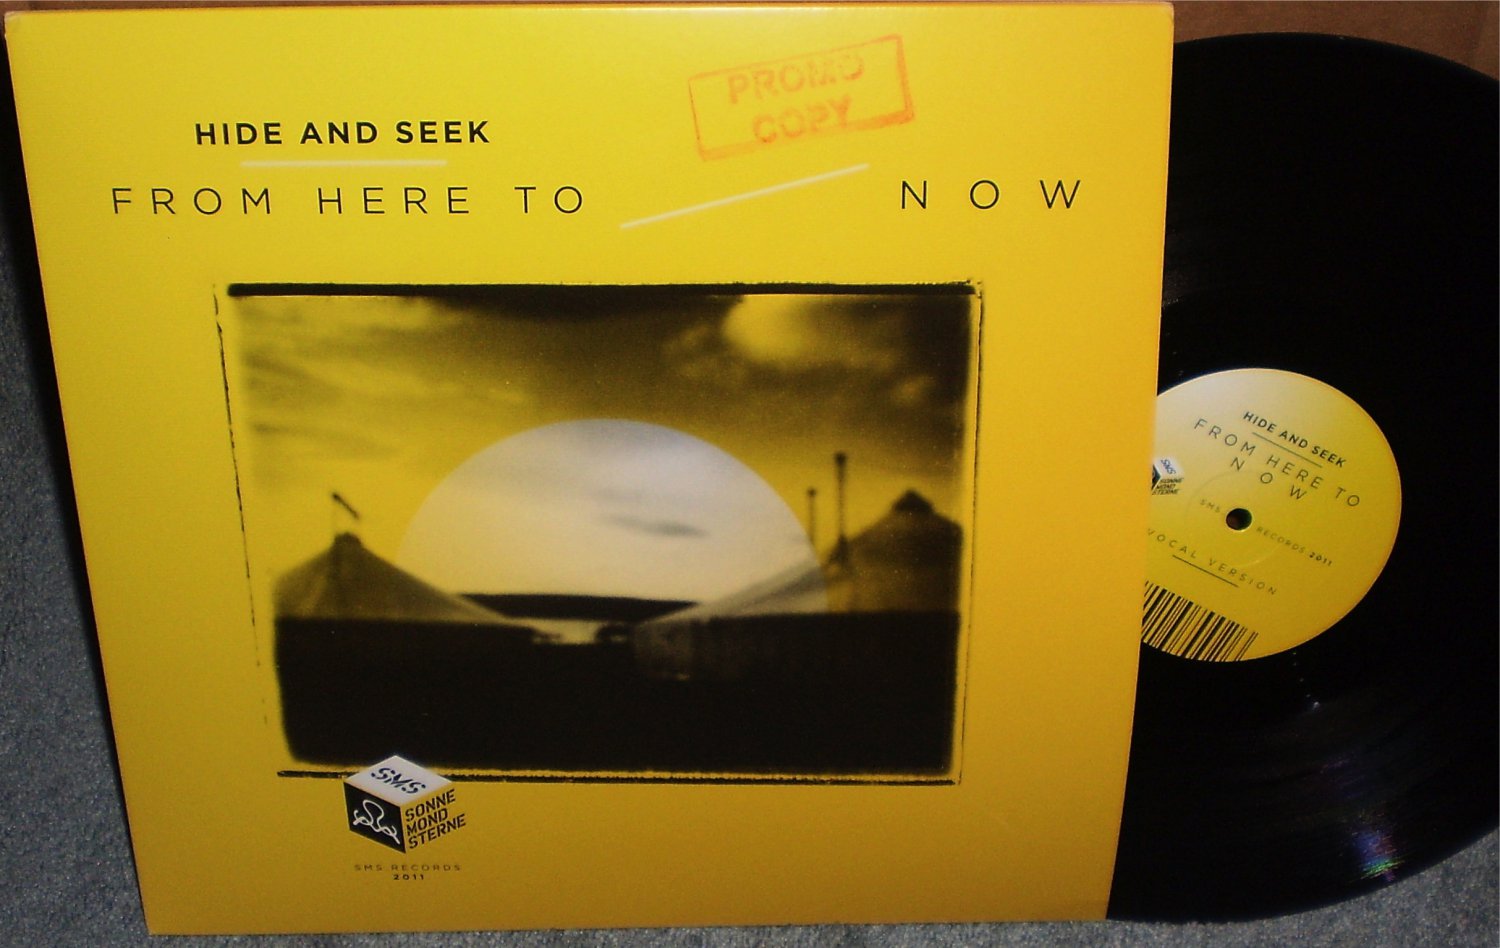 Hide And Seek From Here To Now 12" Vinyl Single Dub Remix LP Promo Copy NEW Rare